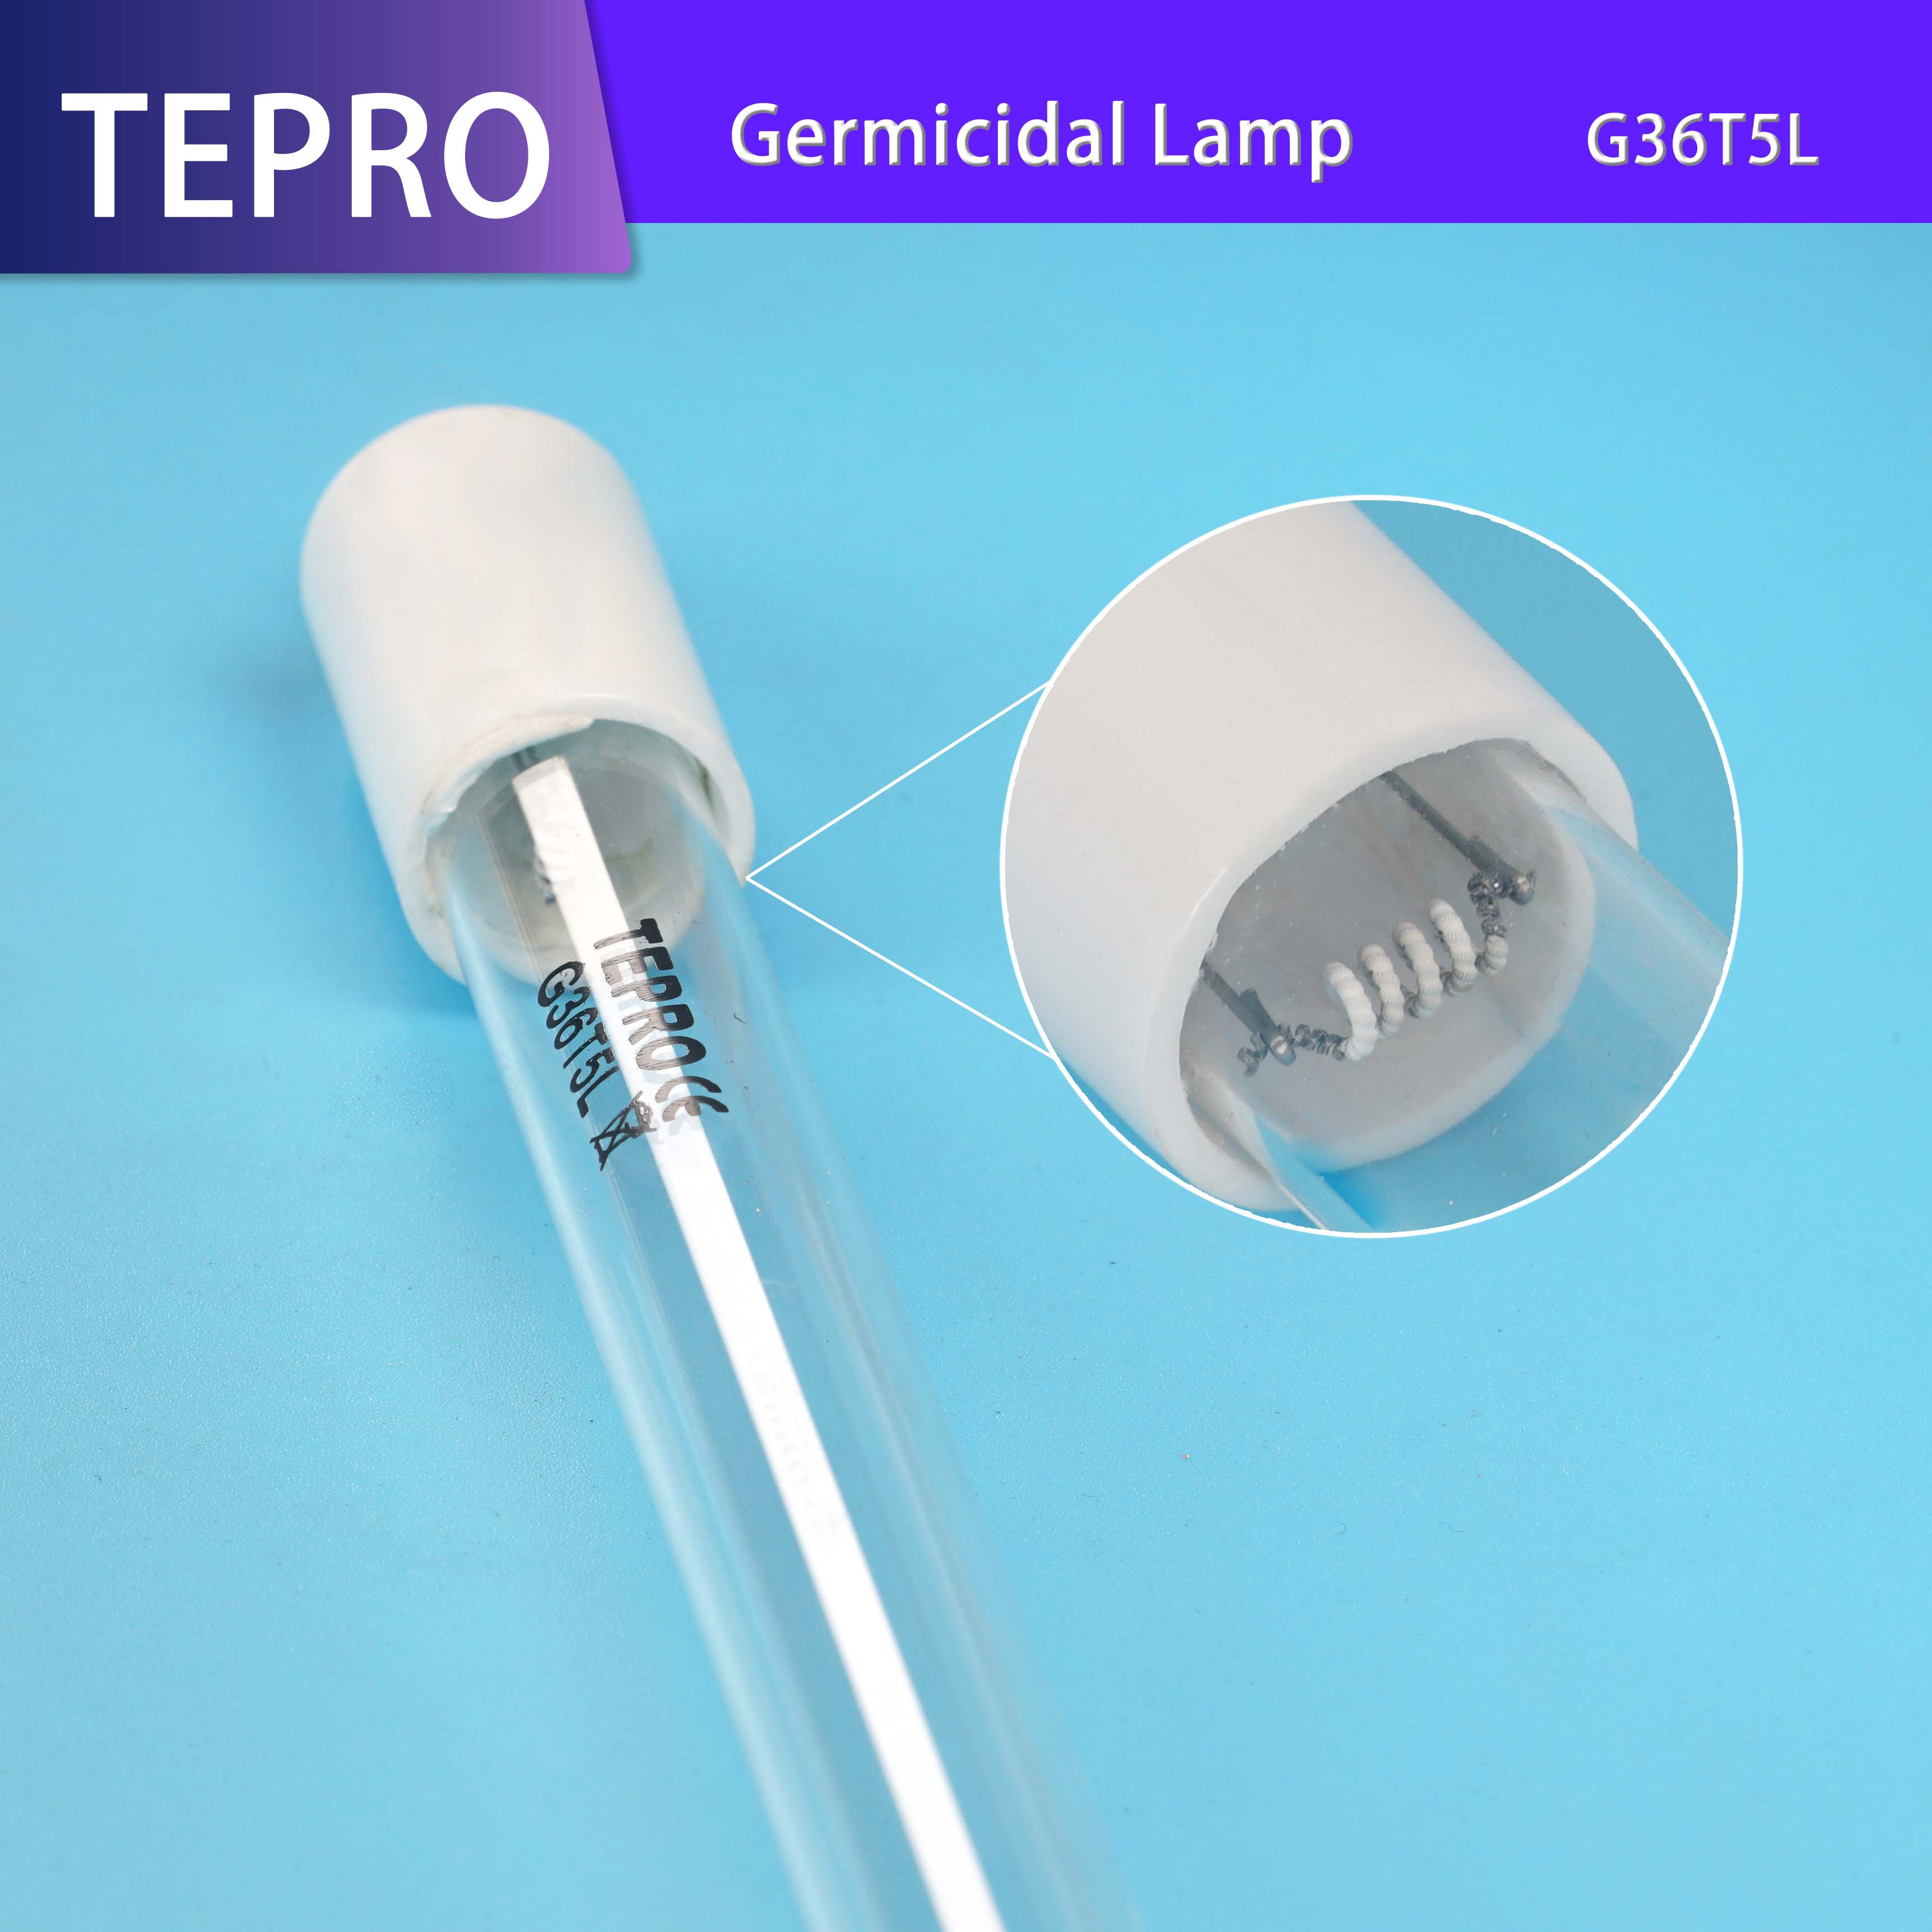 news-bactericidal small uv light tube spare parts for nails-Tepro-img